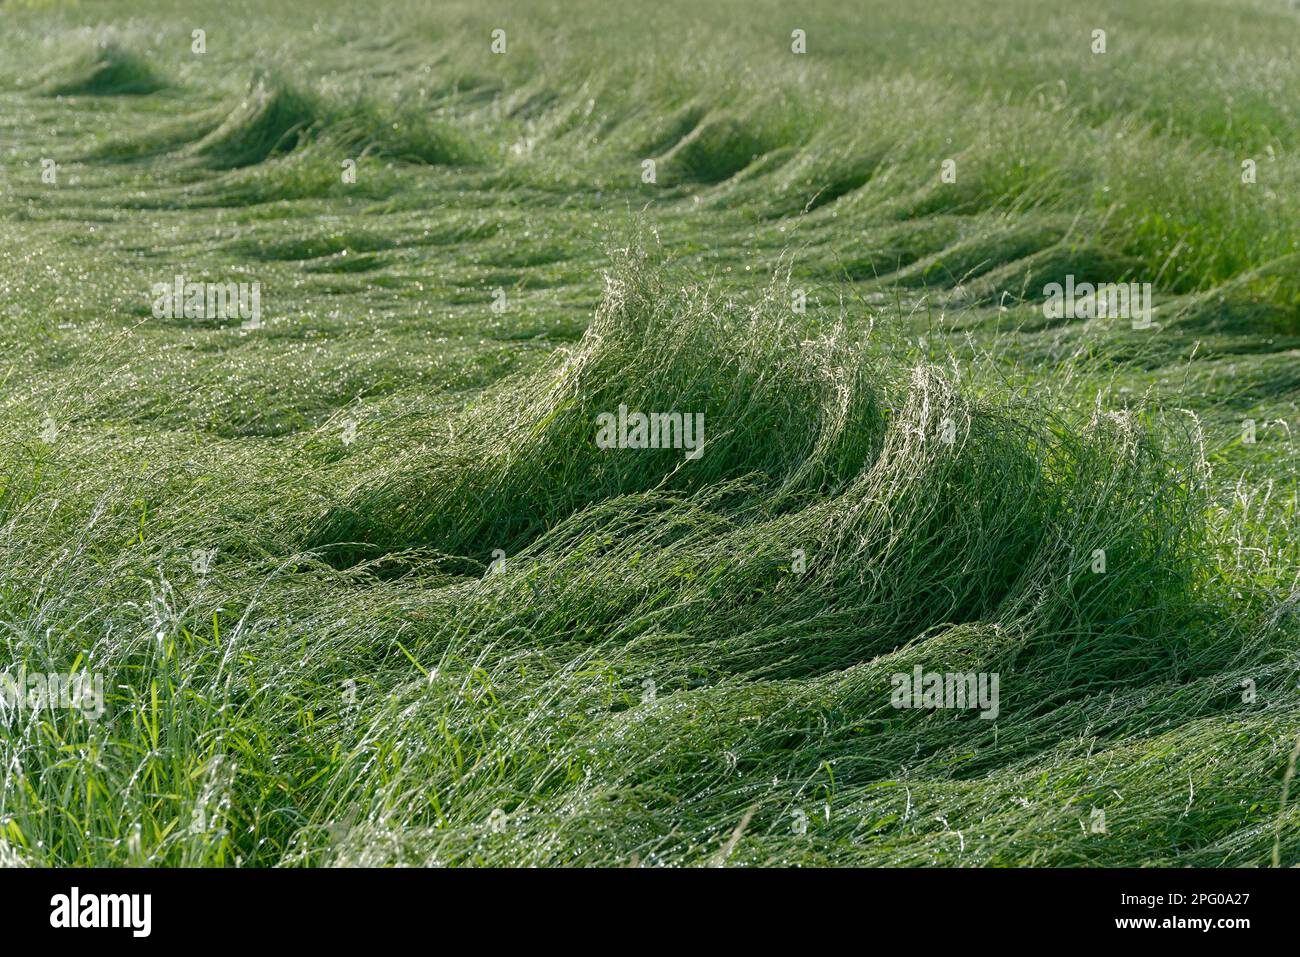 Field with perennial ryegrass (Lolium perenne) after storm, St.Hubert, Kempen, NRW, Germany Stock Photo